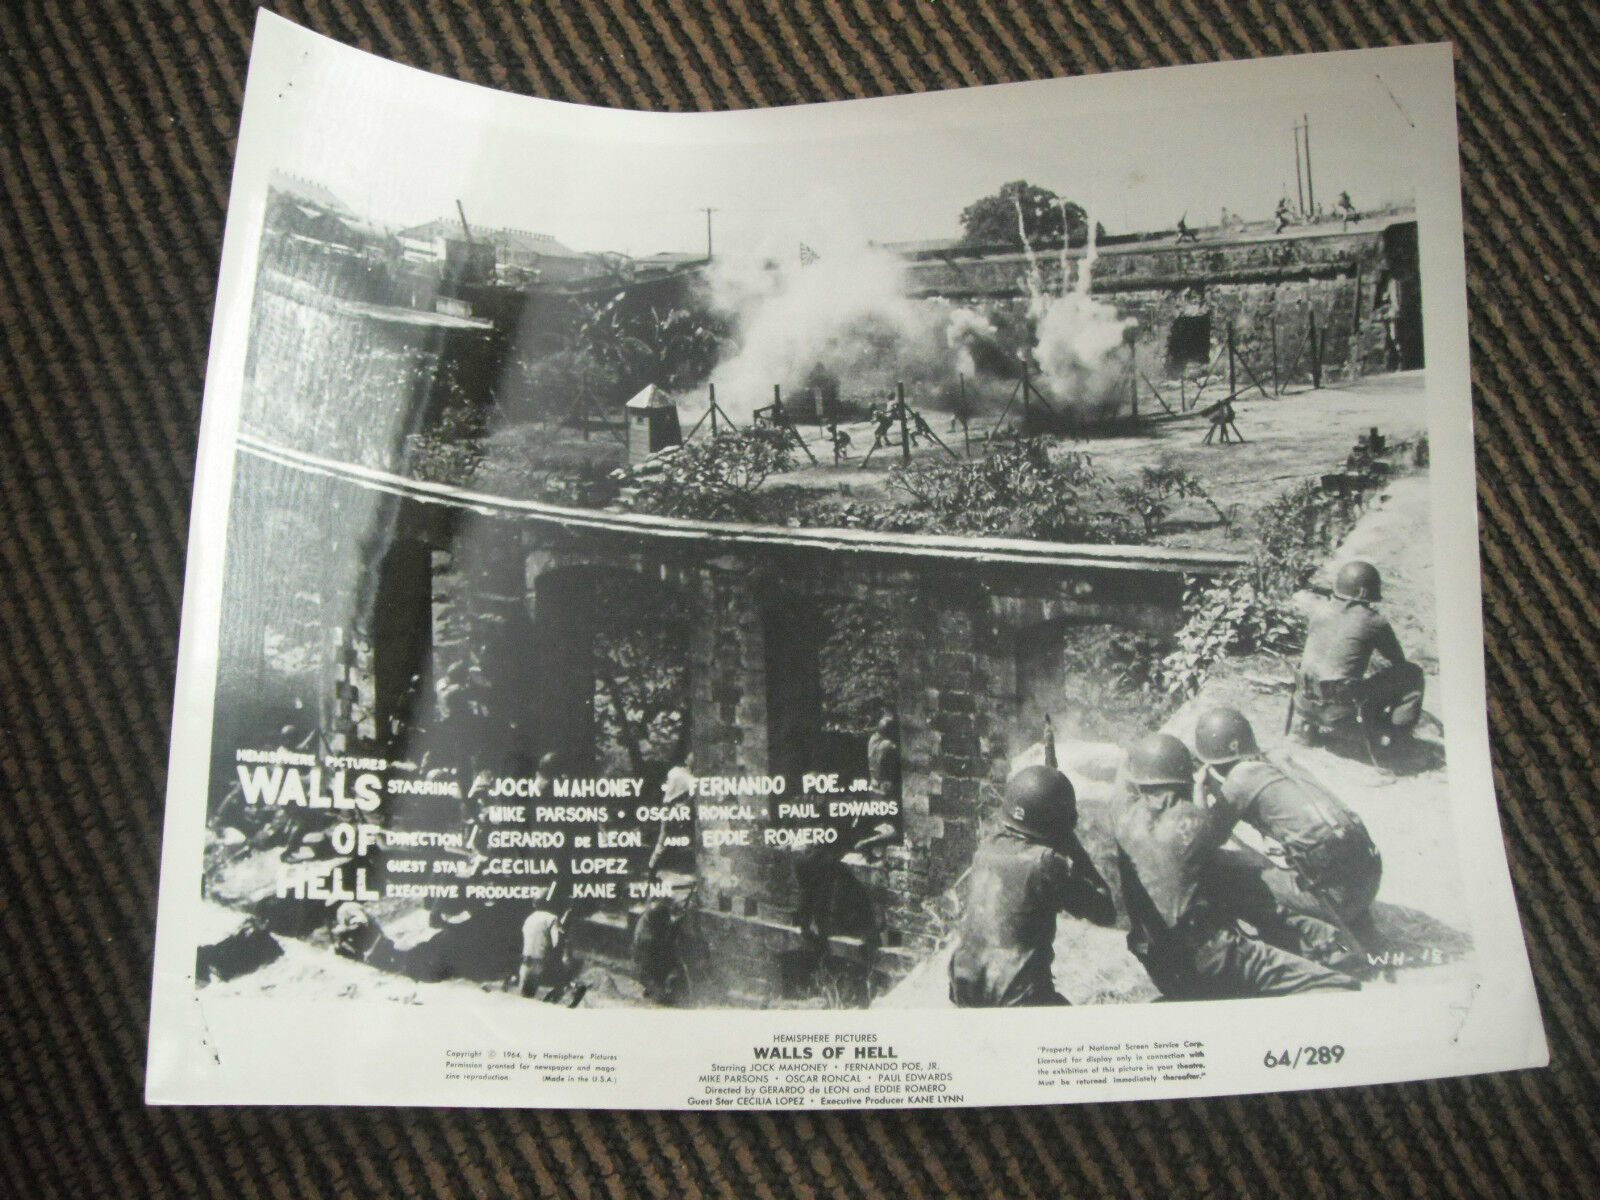 Walls of Hell 1964 B&W 8x10 Promo Photo Poster painting Original Lobby Card